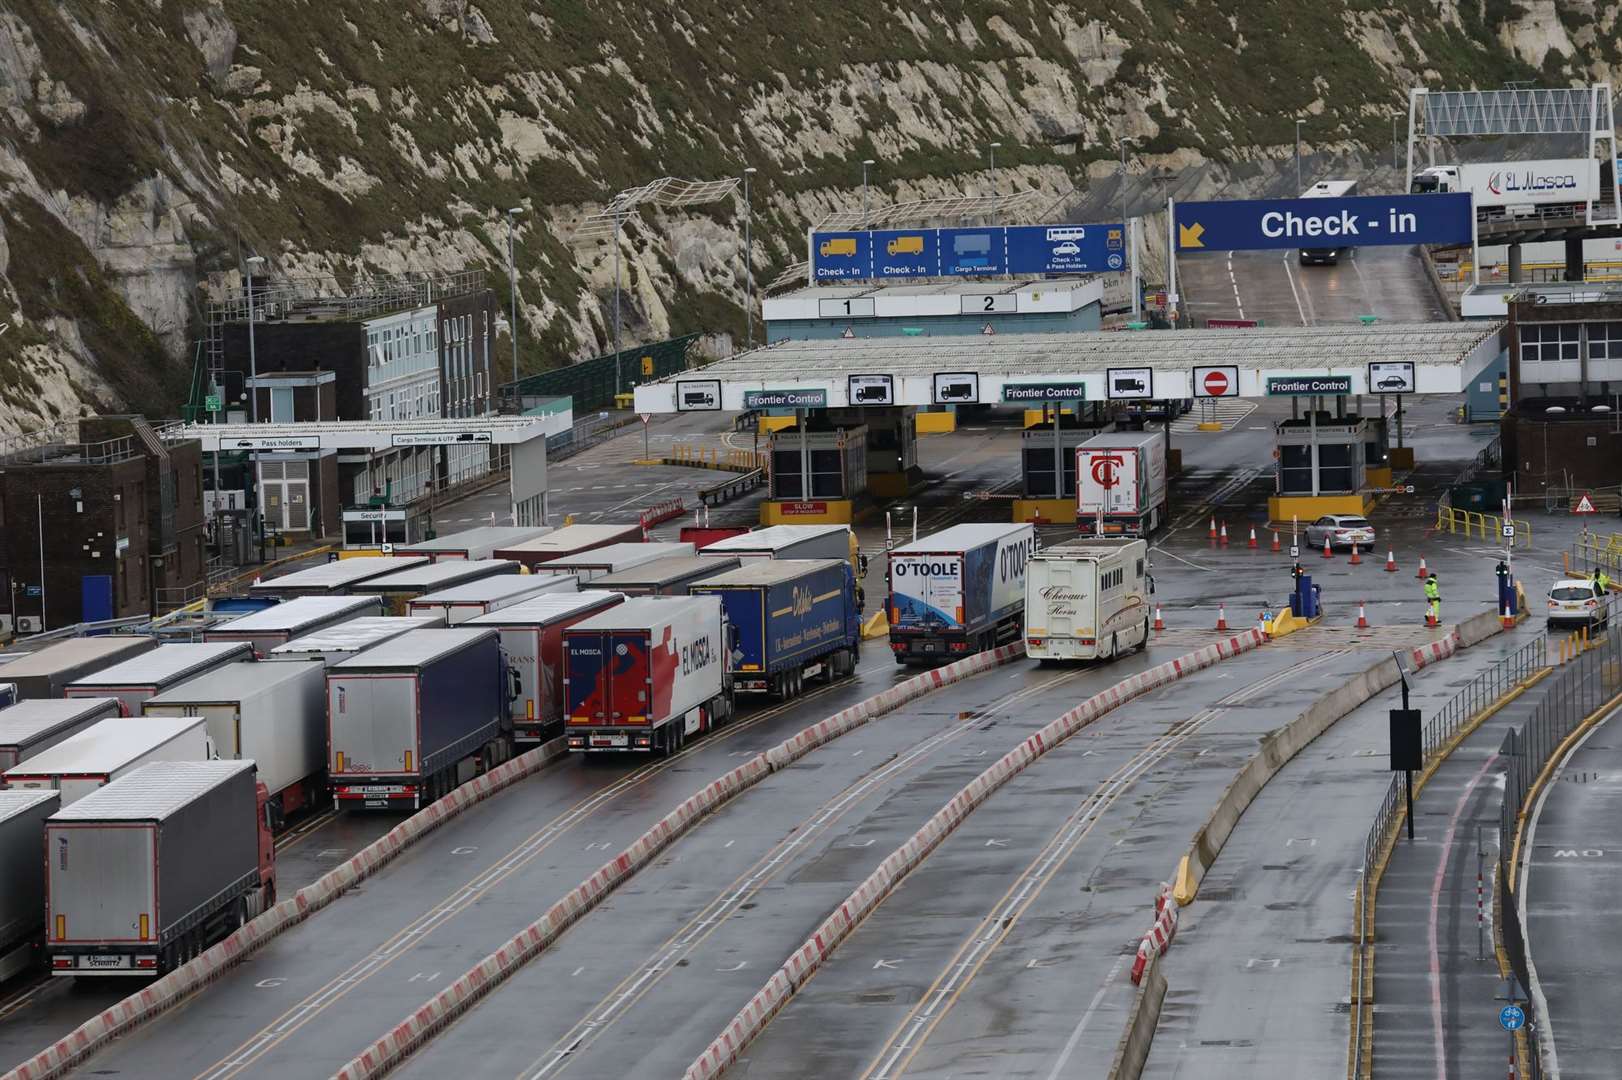 Lorries at the Port of Dover which facilitates sailings to Calais and Dunkirk. Photo: UKNIP